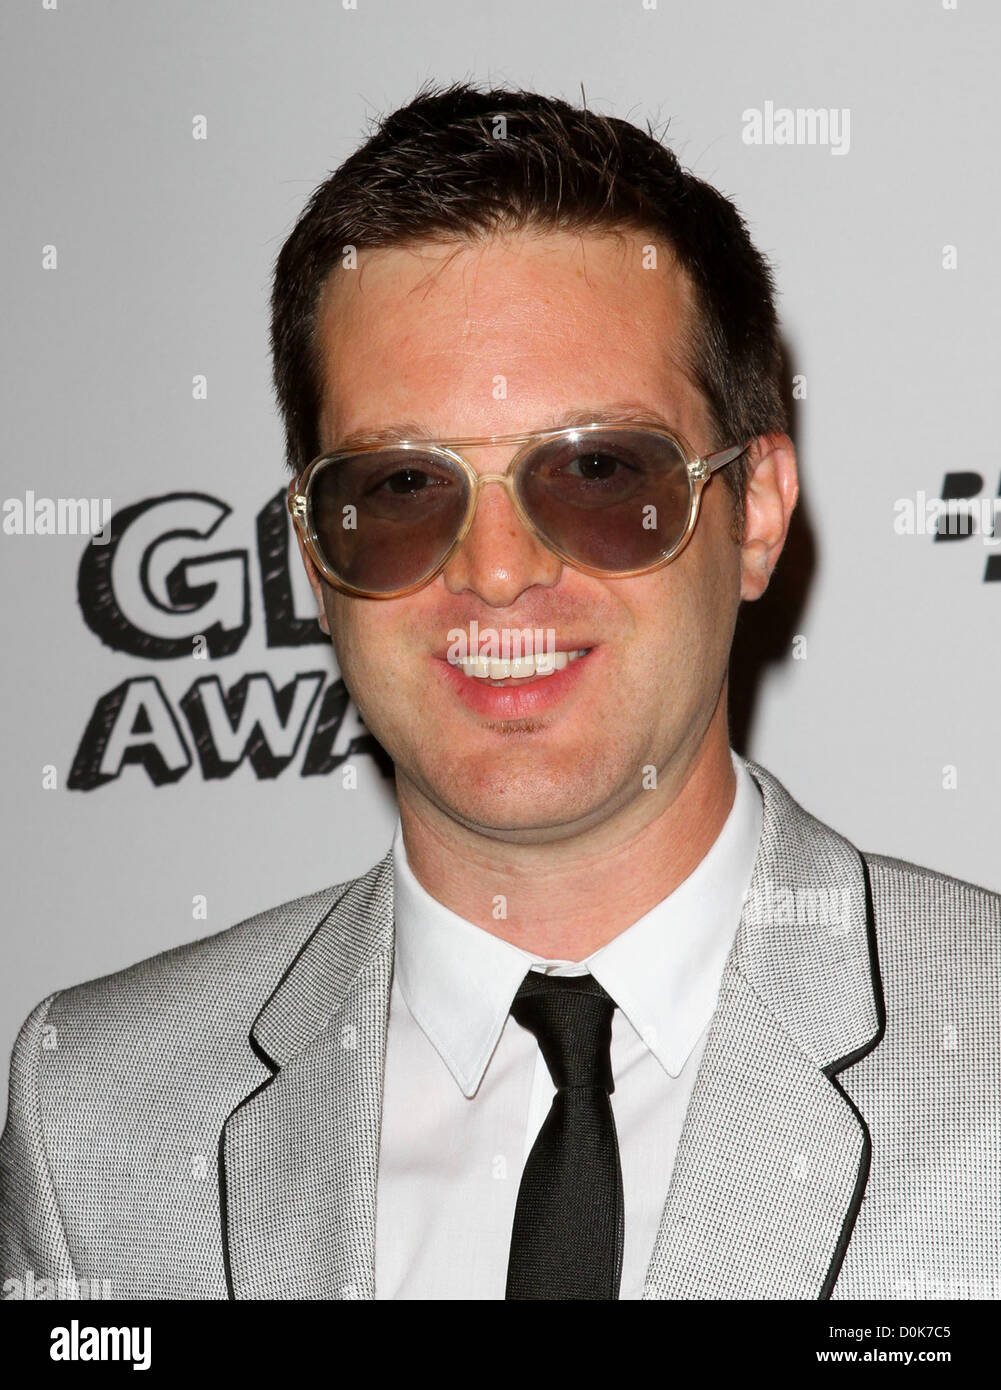 Mayer Hawthorne The 2010 AOL Geek Awards Held at The Conga Room Los Angeles, California - 18.08.10 Stock Photo